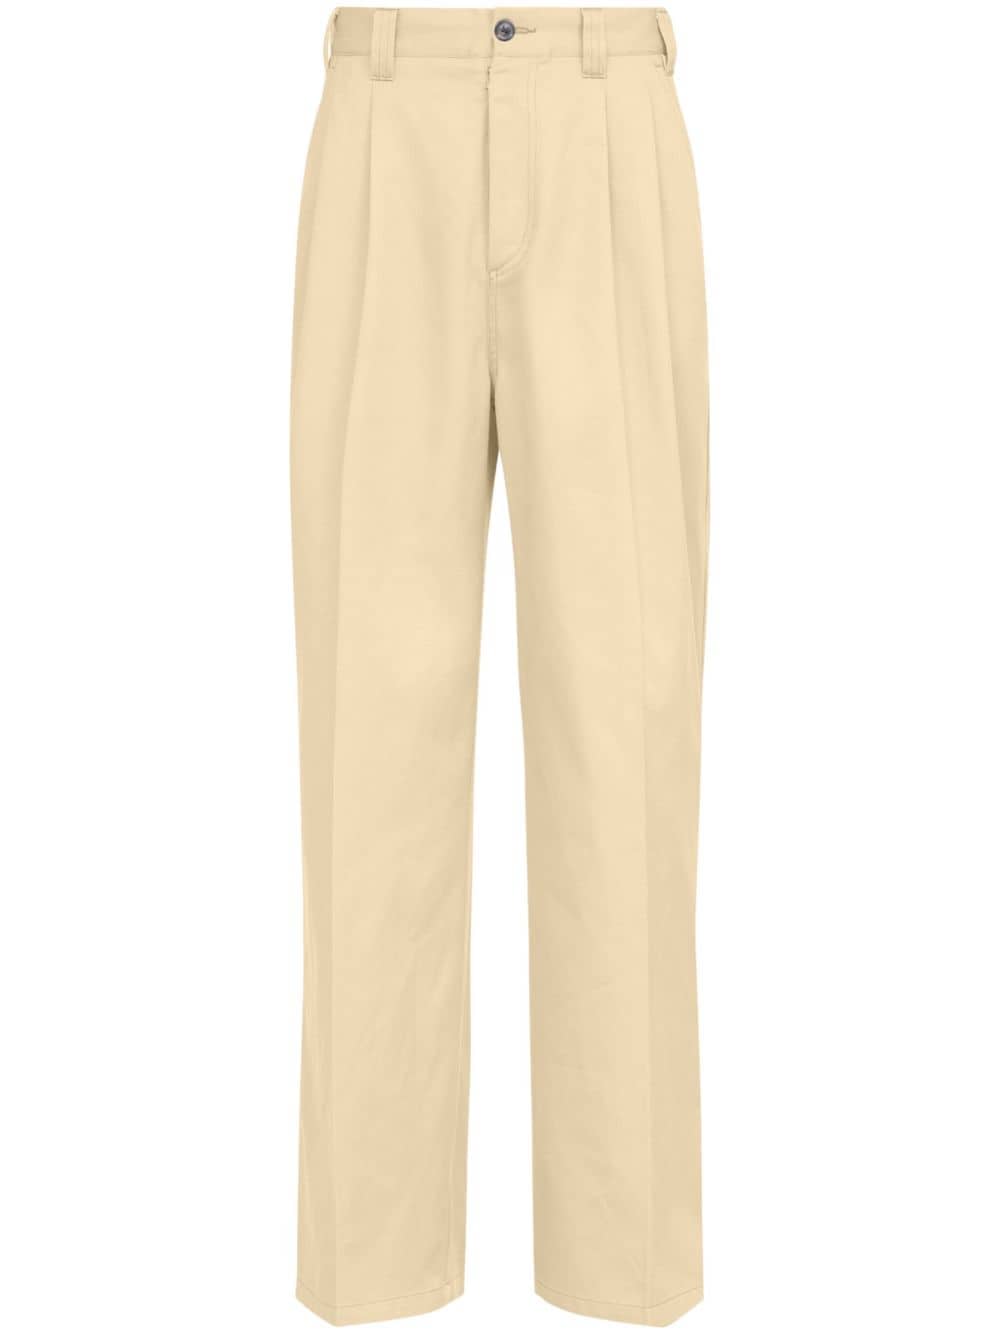 Maison Margiela Skater Chino Trousers In Neutrals